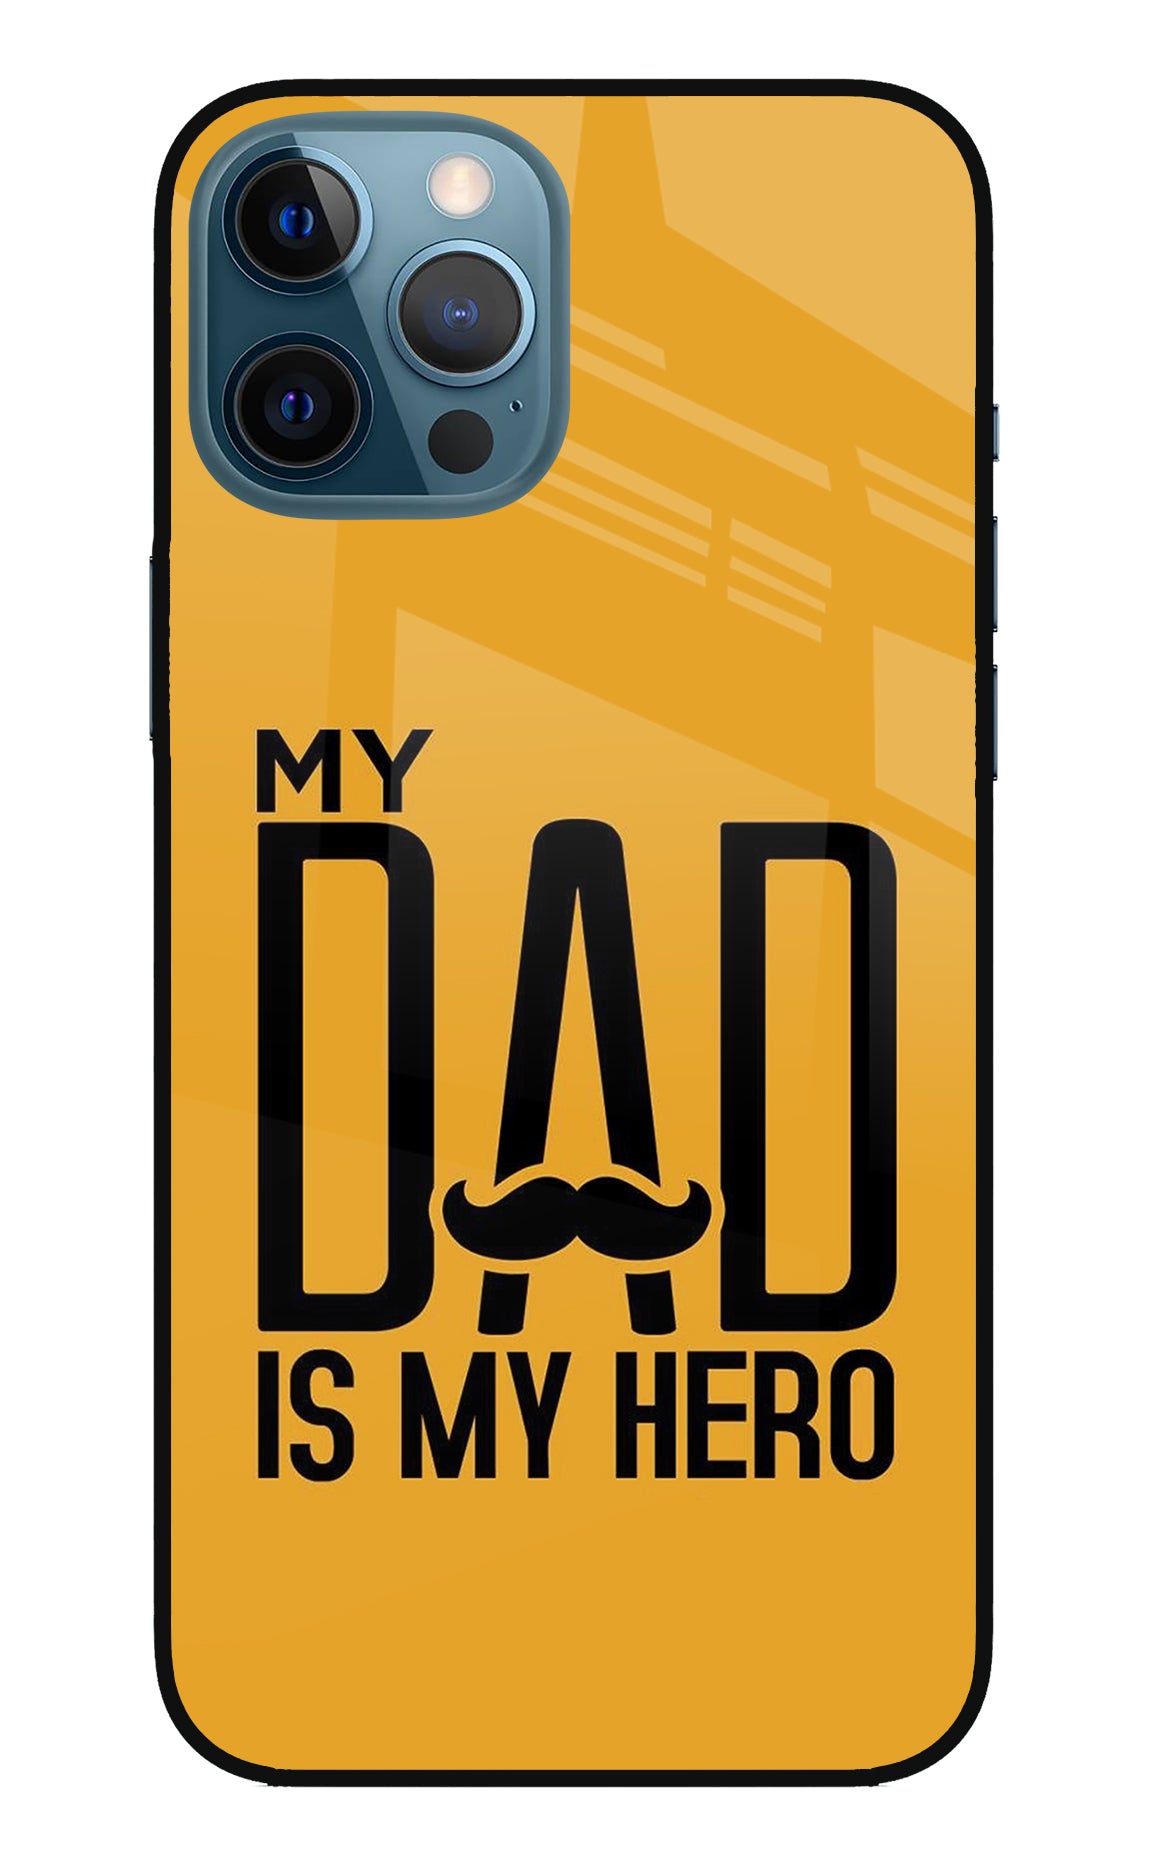 My Dad Is My Hero iPhone 12 Pro Max Back Cover